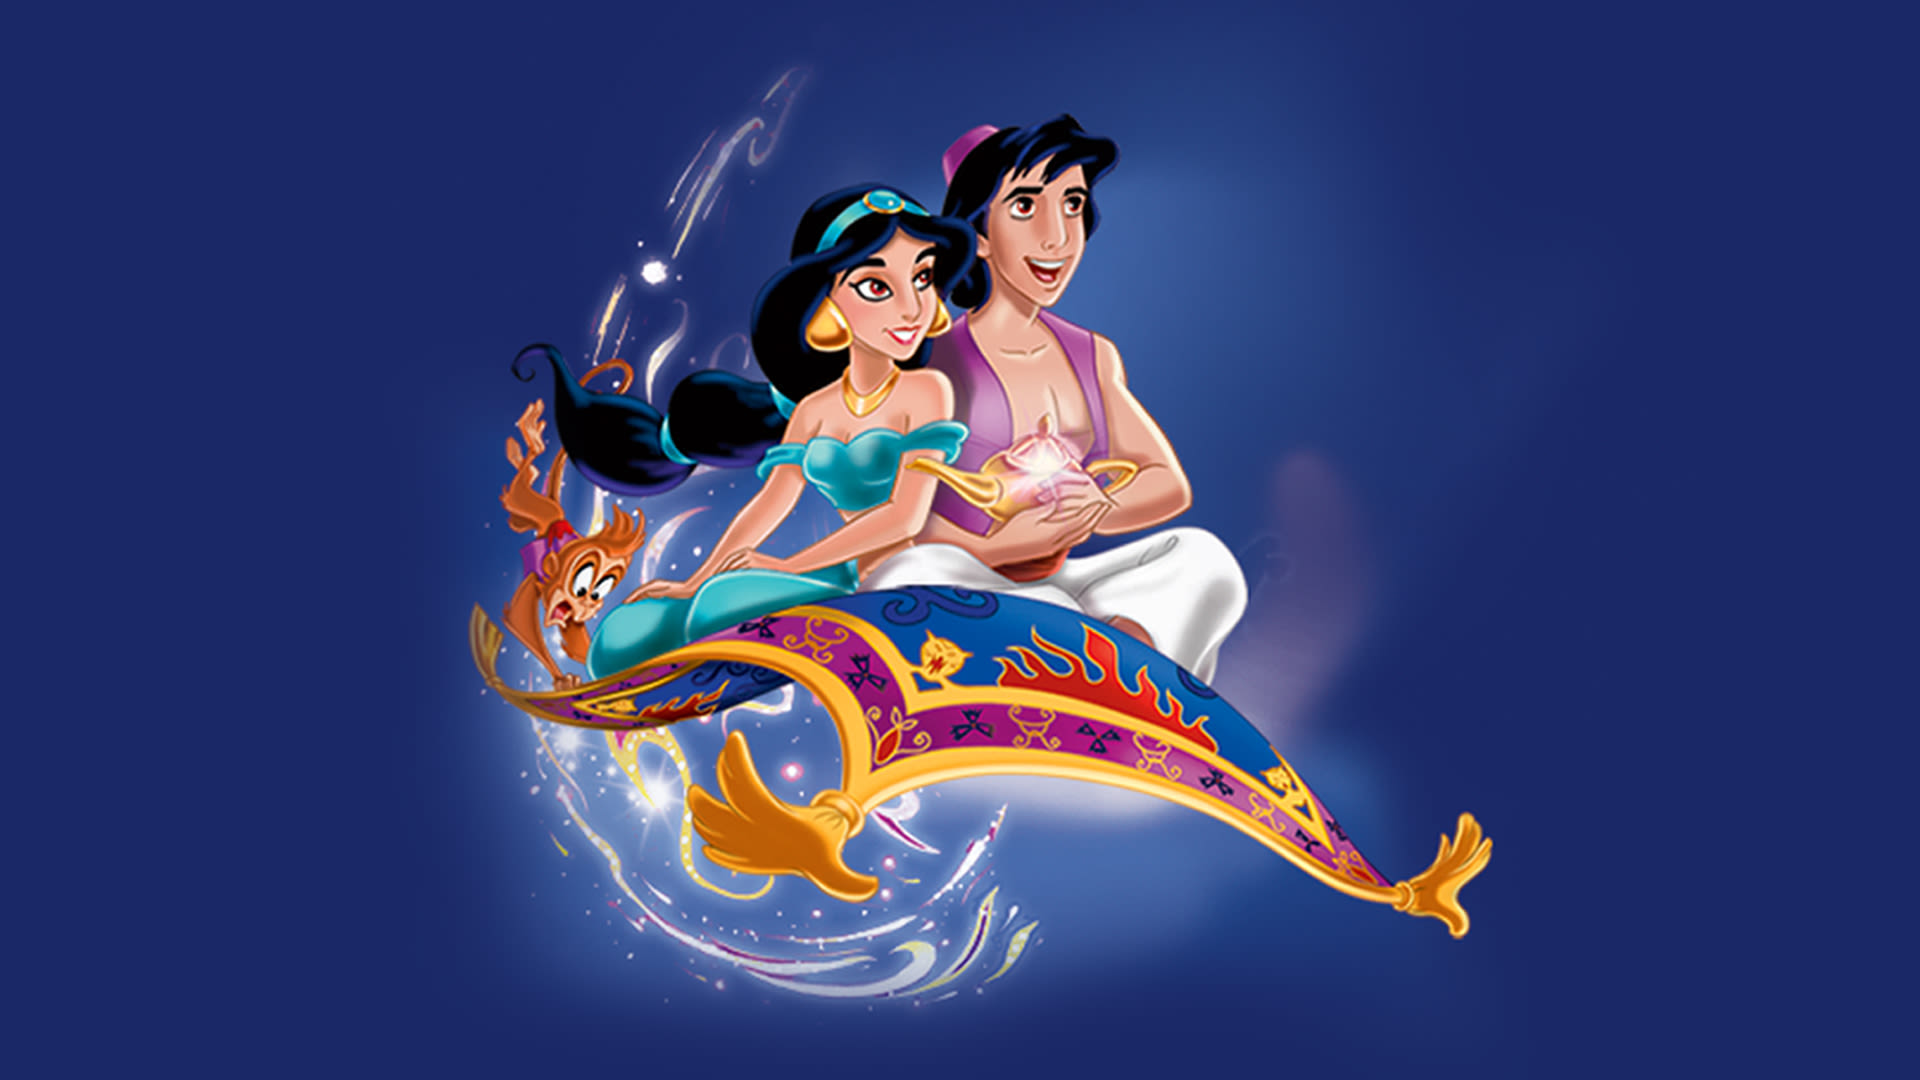 curtus easter recommends aladdin cartoon watch online pic